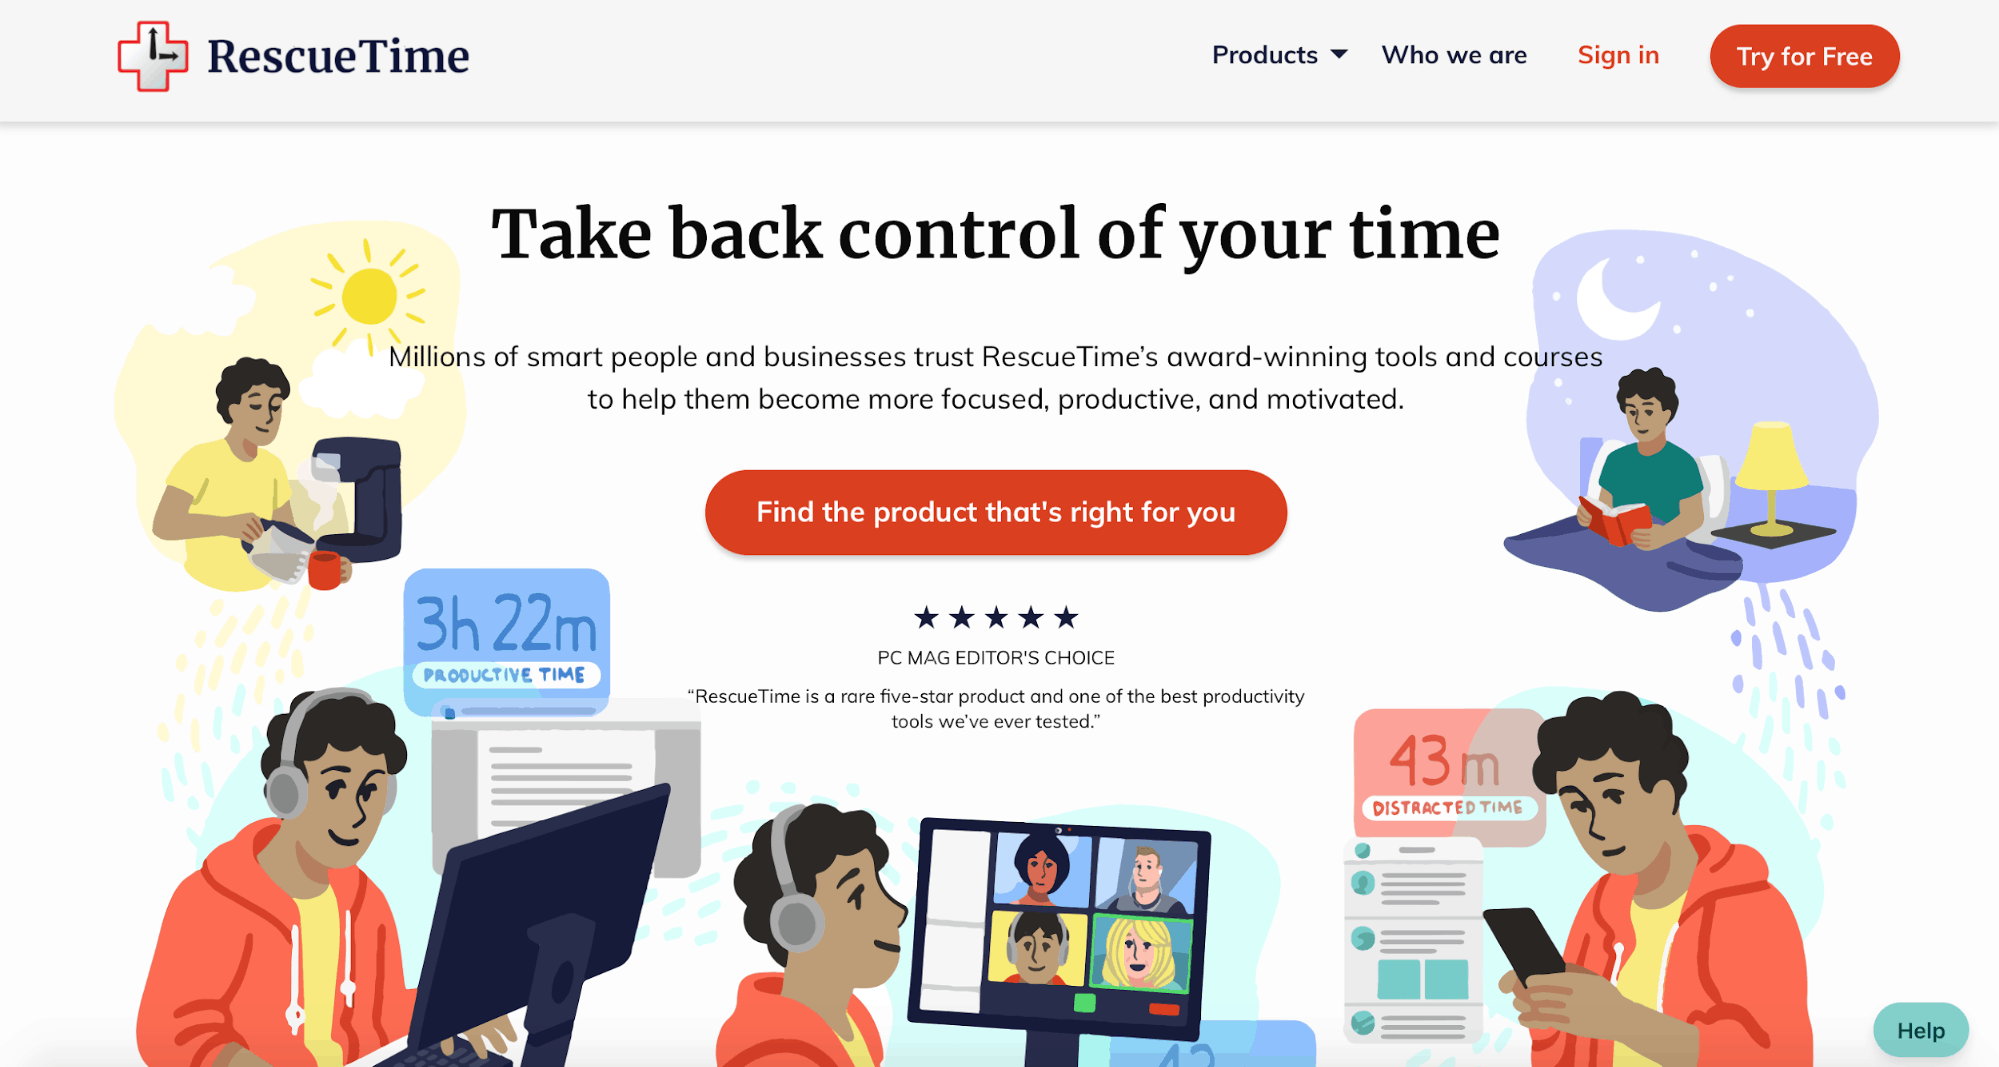 Time management tools - RescueTime